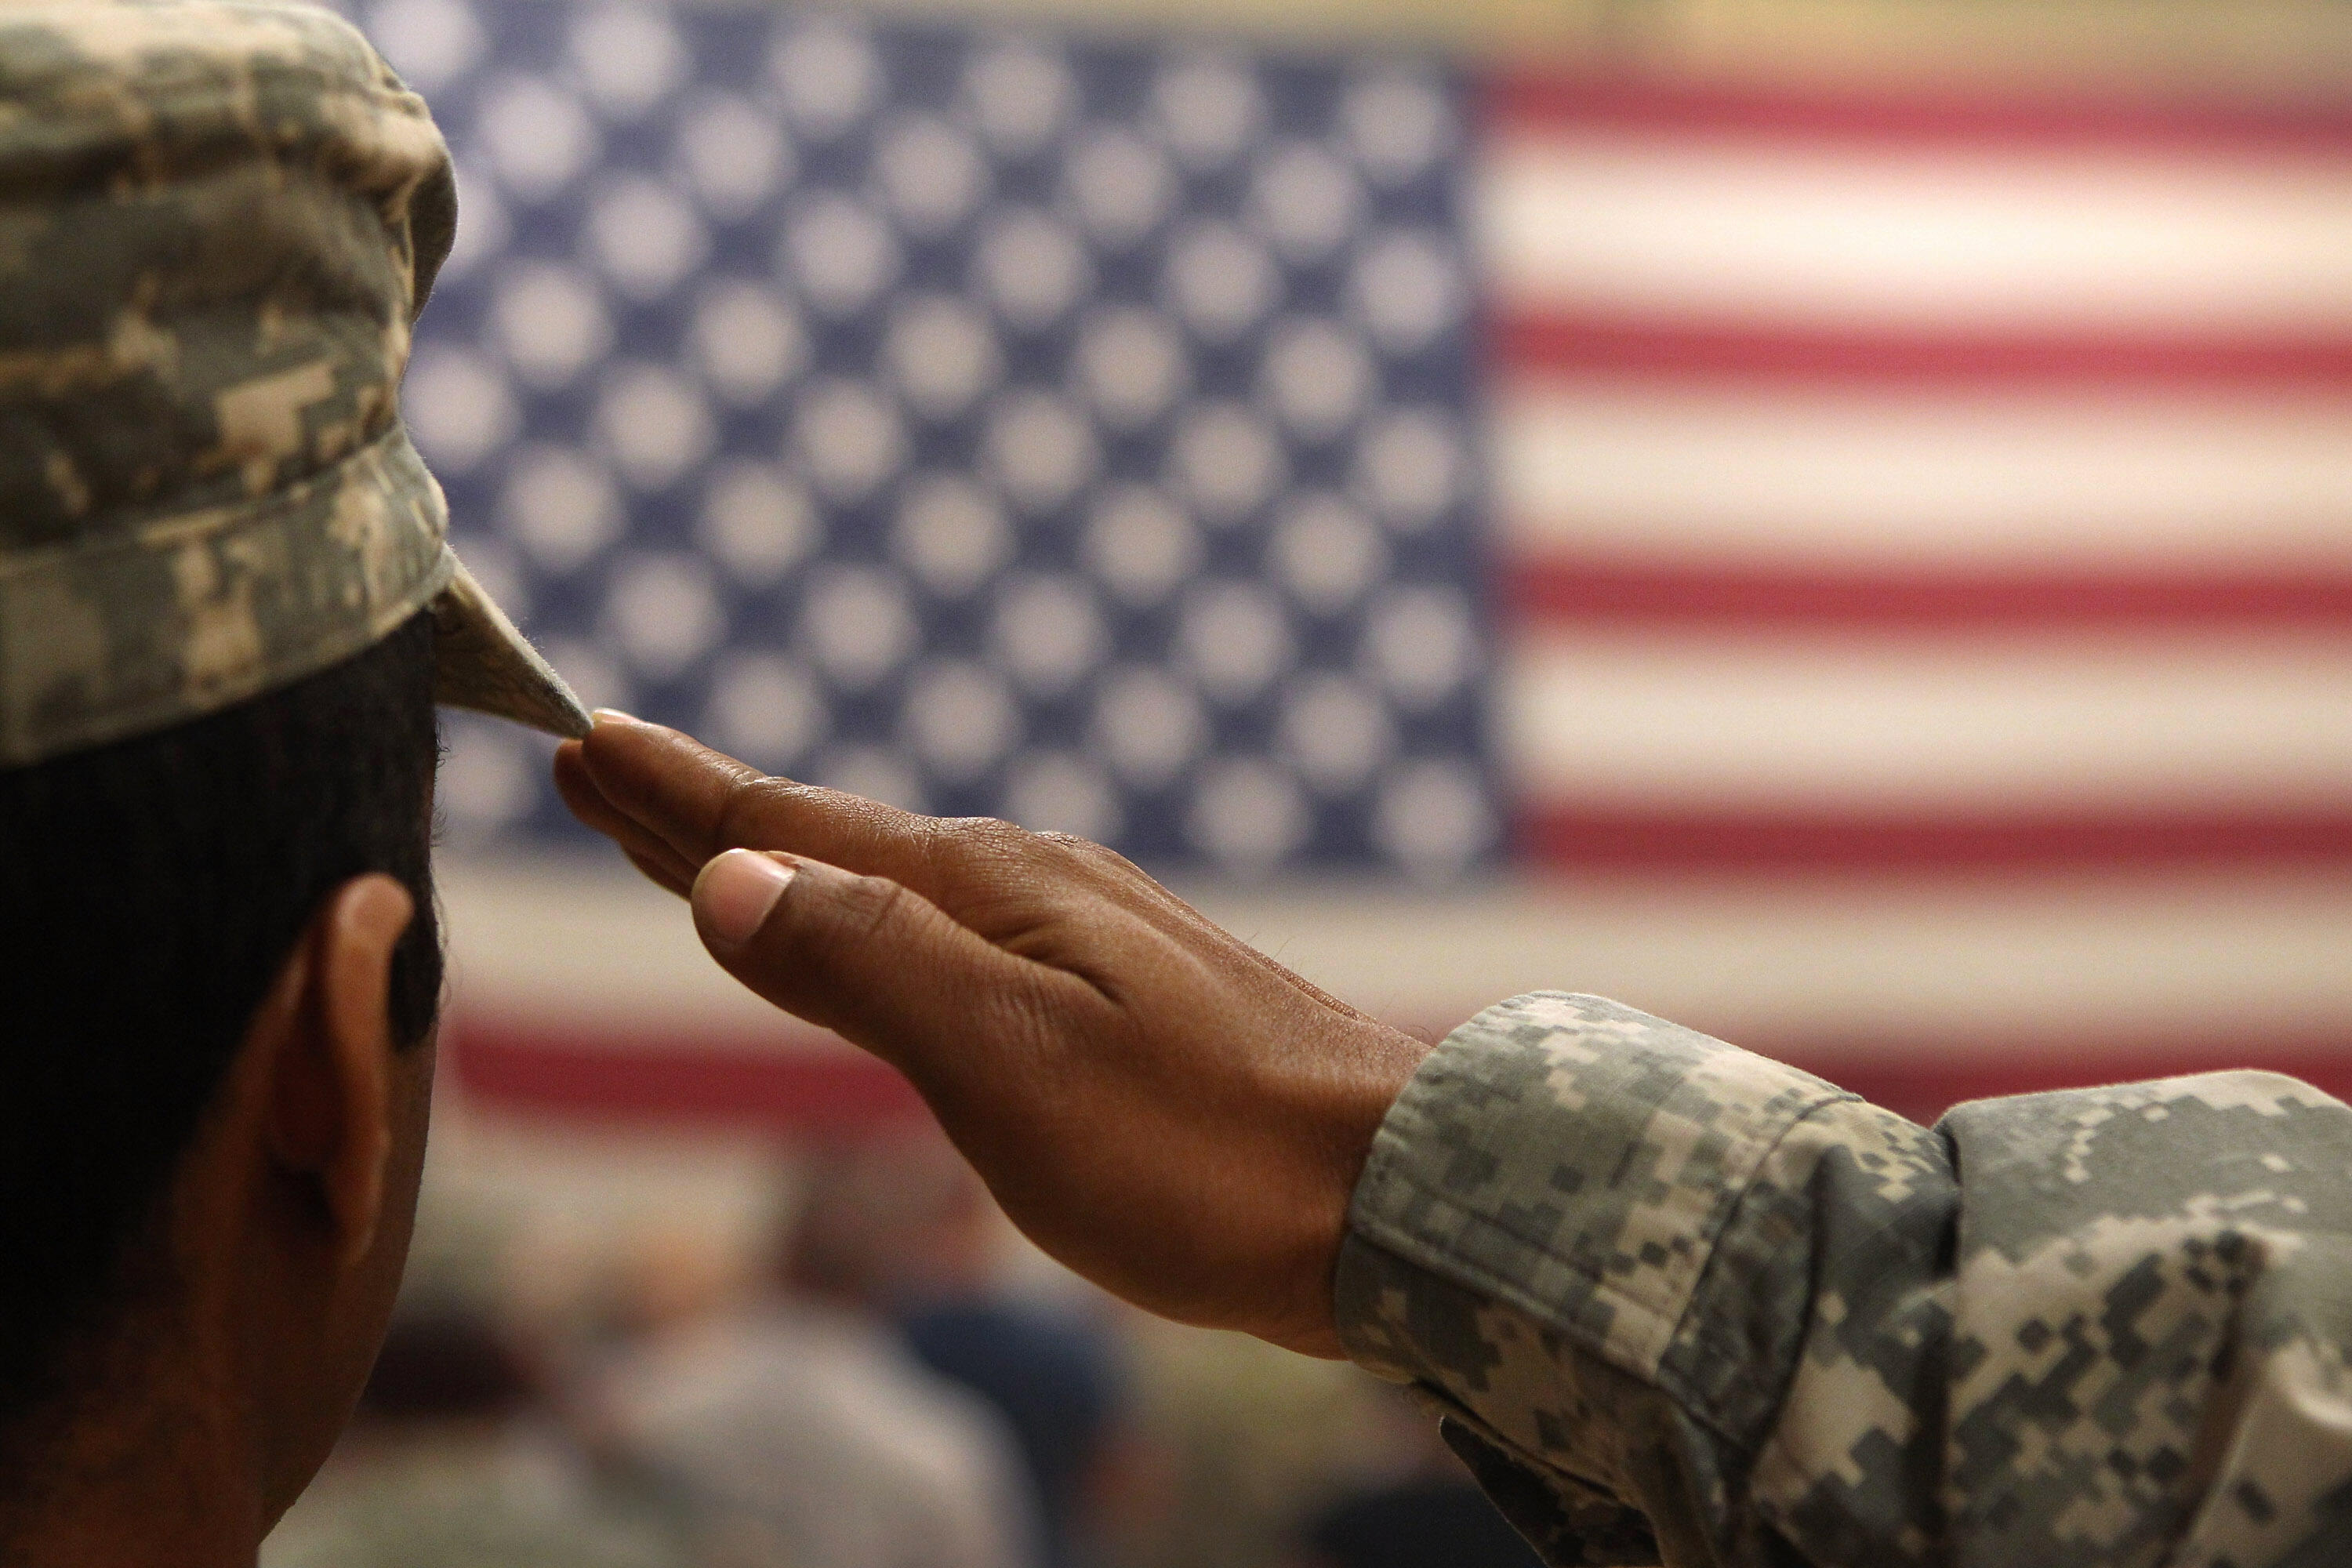 FORT CARSON, CO - JUNE 15:  A soldier salutes the flag during a welcome home ceremony for troops arriving from Afghanistan on June 15, 2011 to Fort Carson, Colorado. More than 500 soldiers from the 1st Brigade Combat Team returned home following a year of